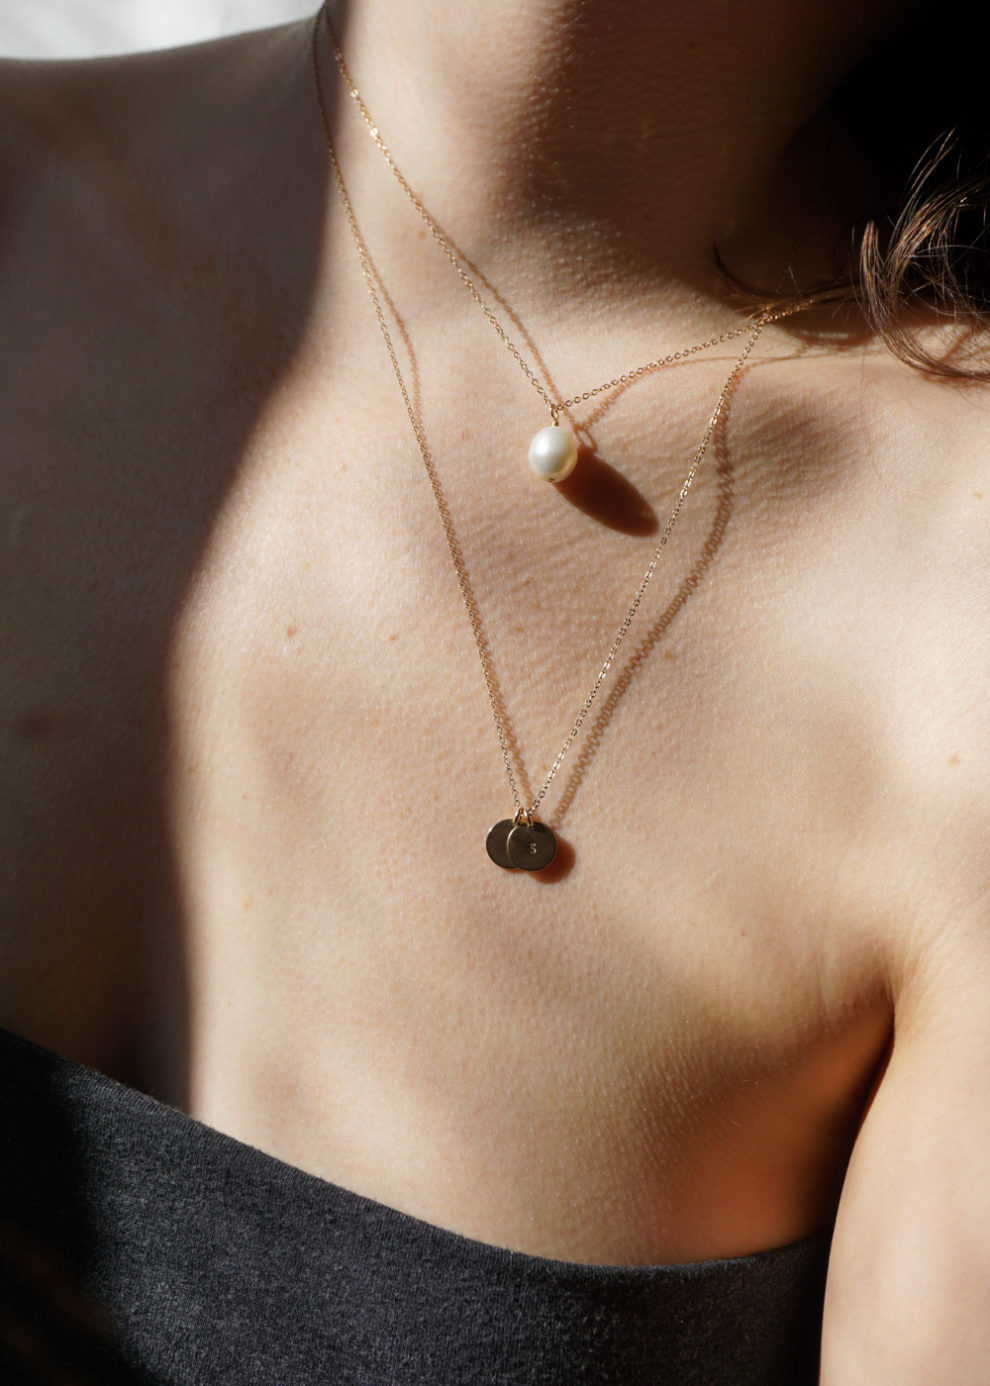 GLDN ~ Lovely & Simple Handmade Jewelry — RG Daily